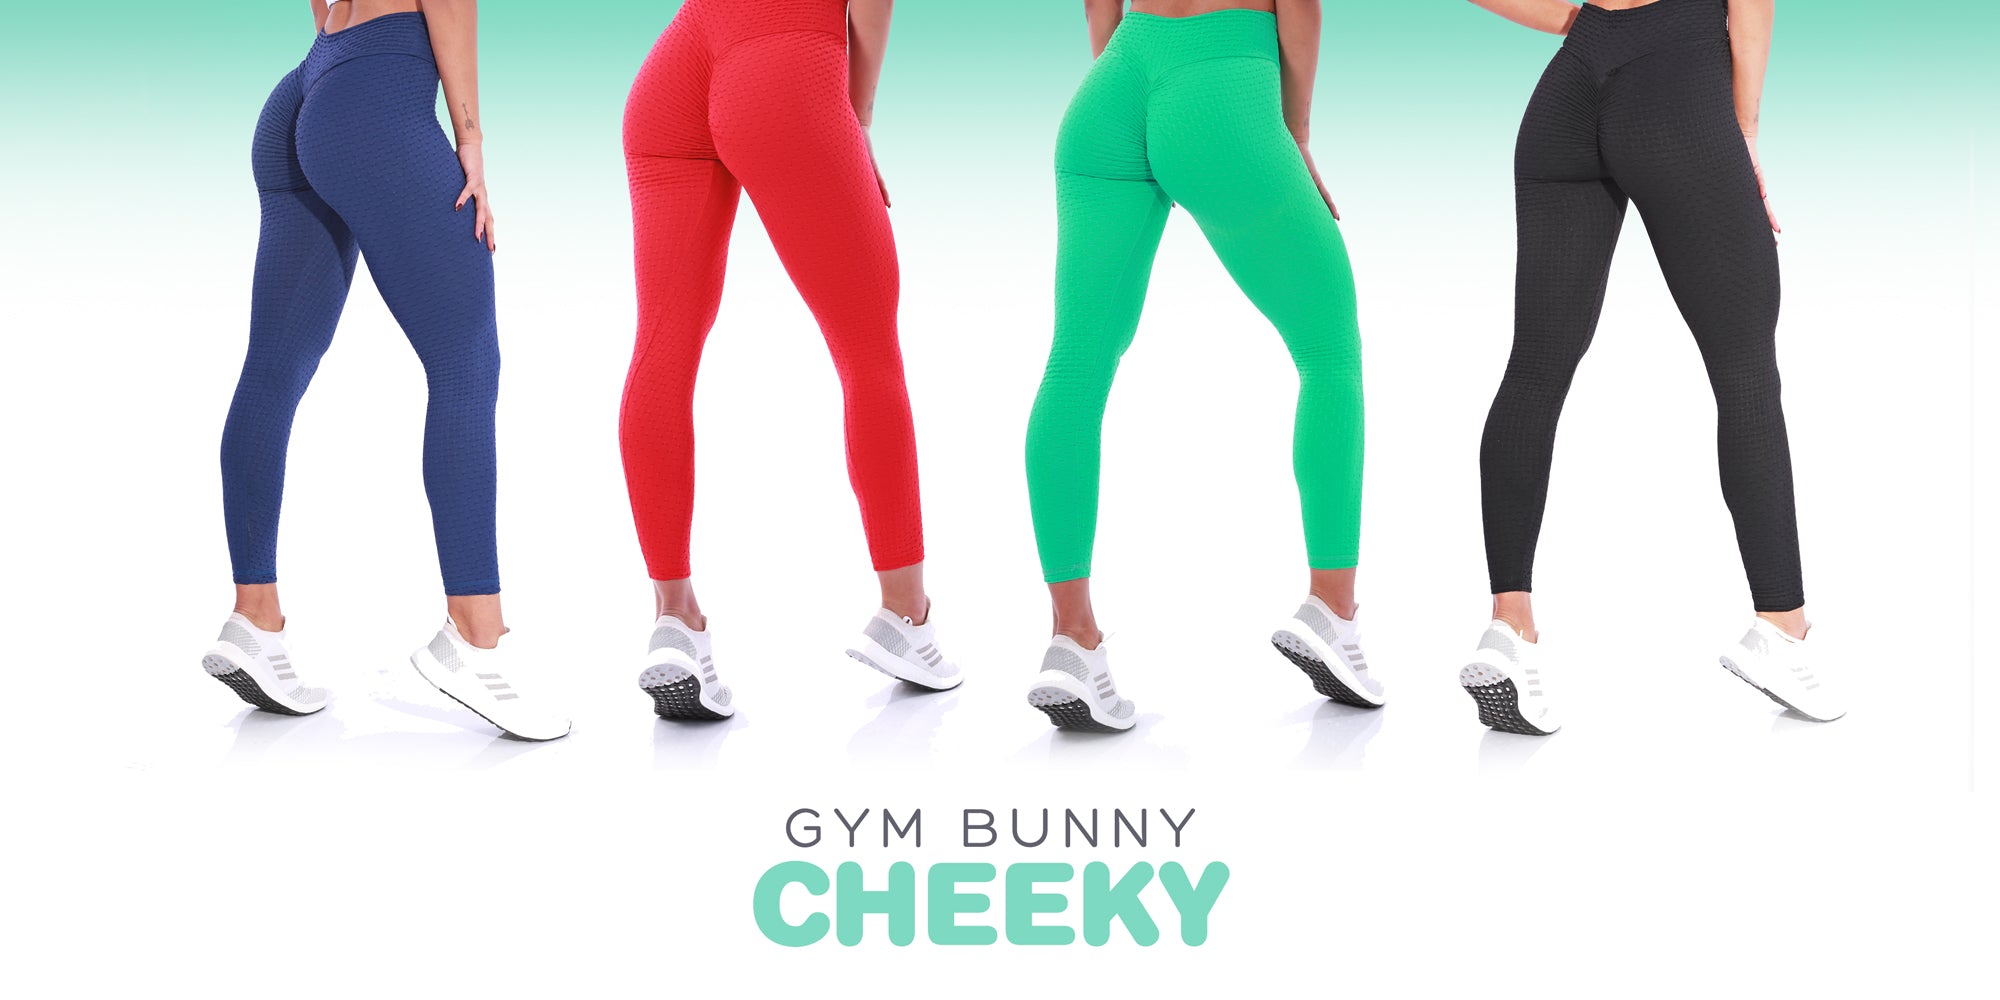  Famous TikTok Leggings, Women's Ruched Butt Lifting High Waist  Yoga Pants Tummy Control Workout Textured Booty Tights Mint Green :  Clothing, Shoes & Jewelry